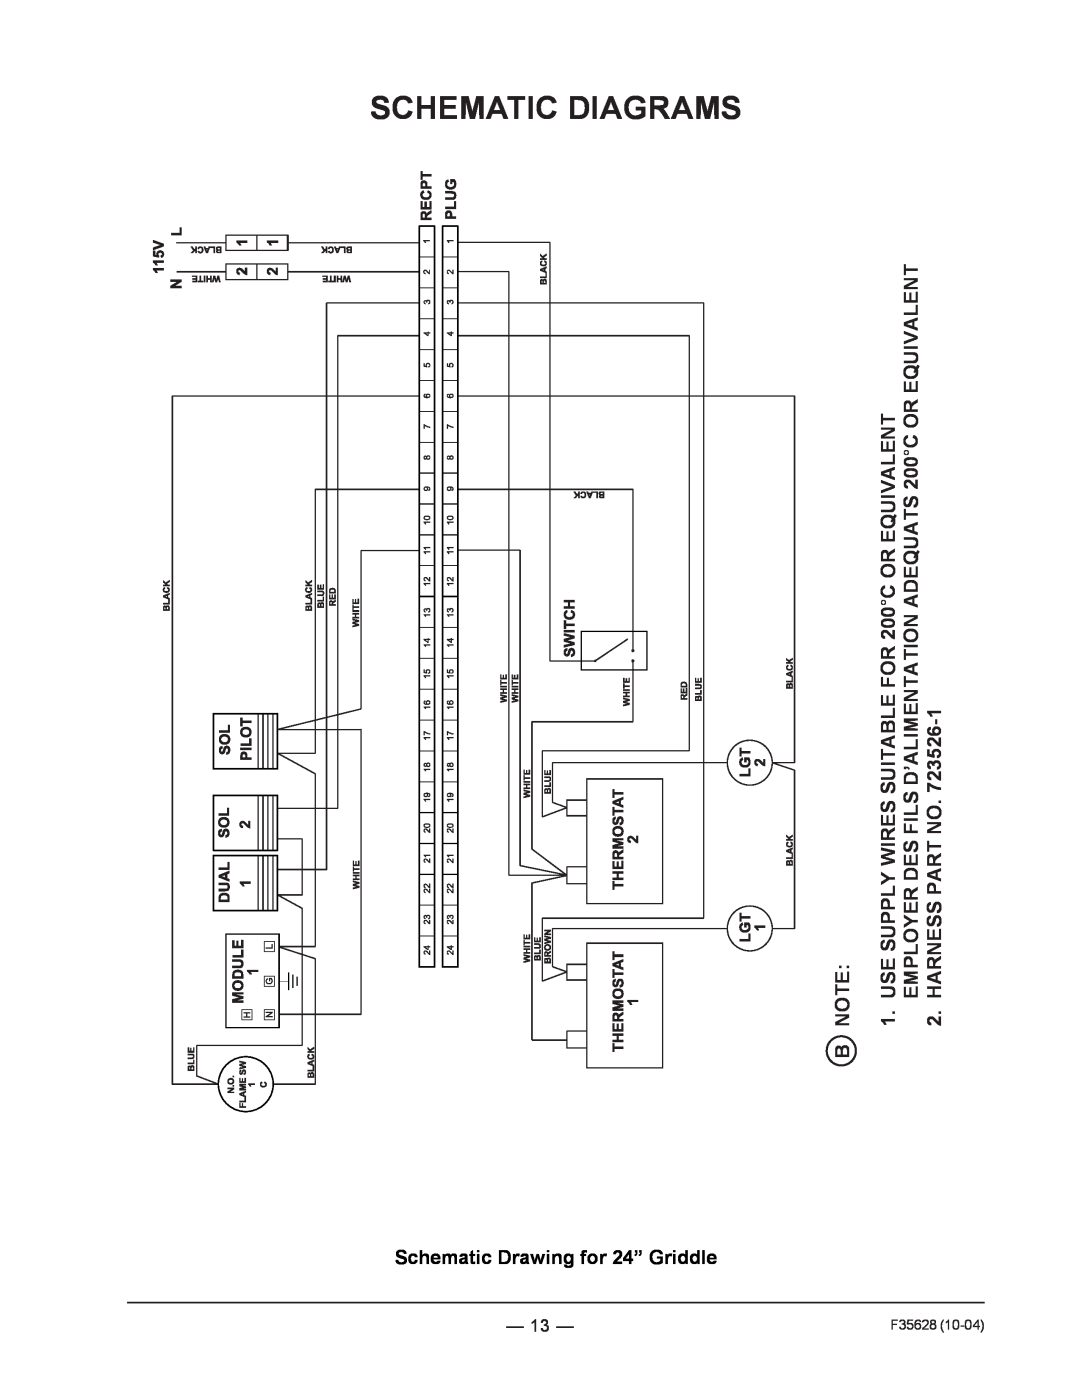 Vulcan-Hart service manual Schematic Diagrams, Schematic Drawing for 24” Griddle, F35628 